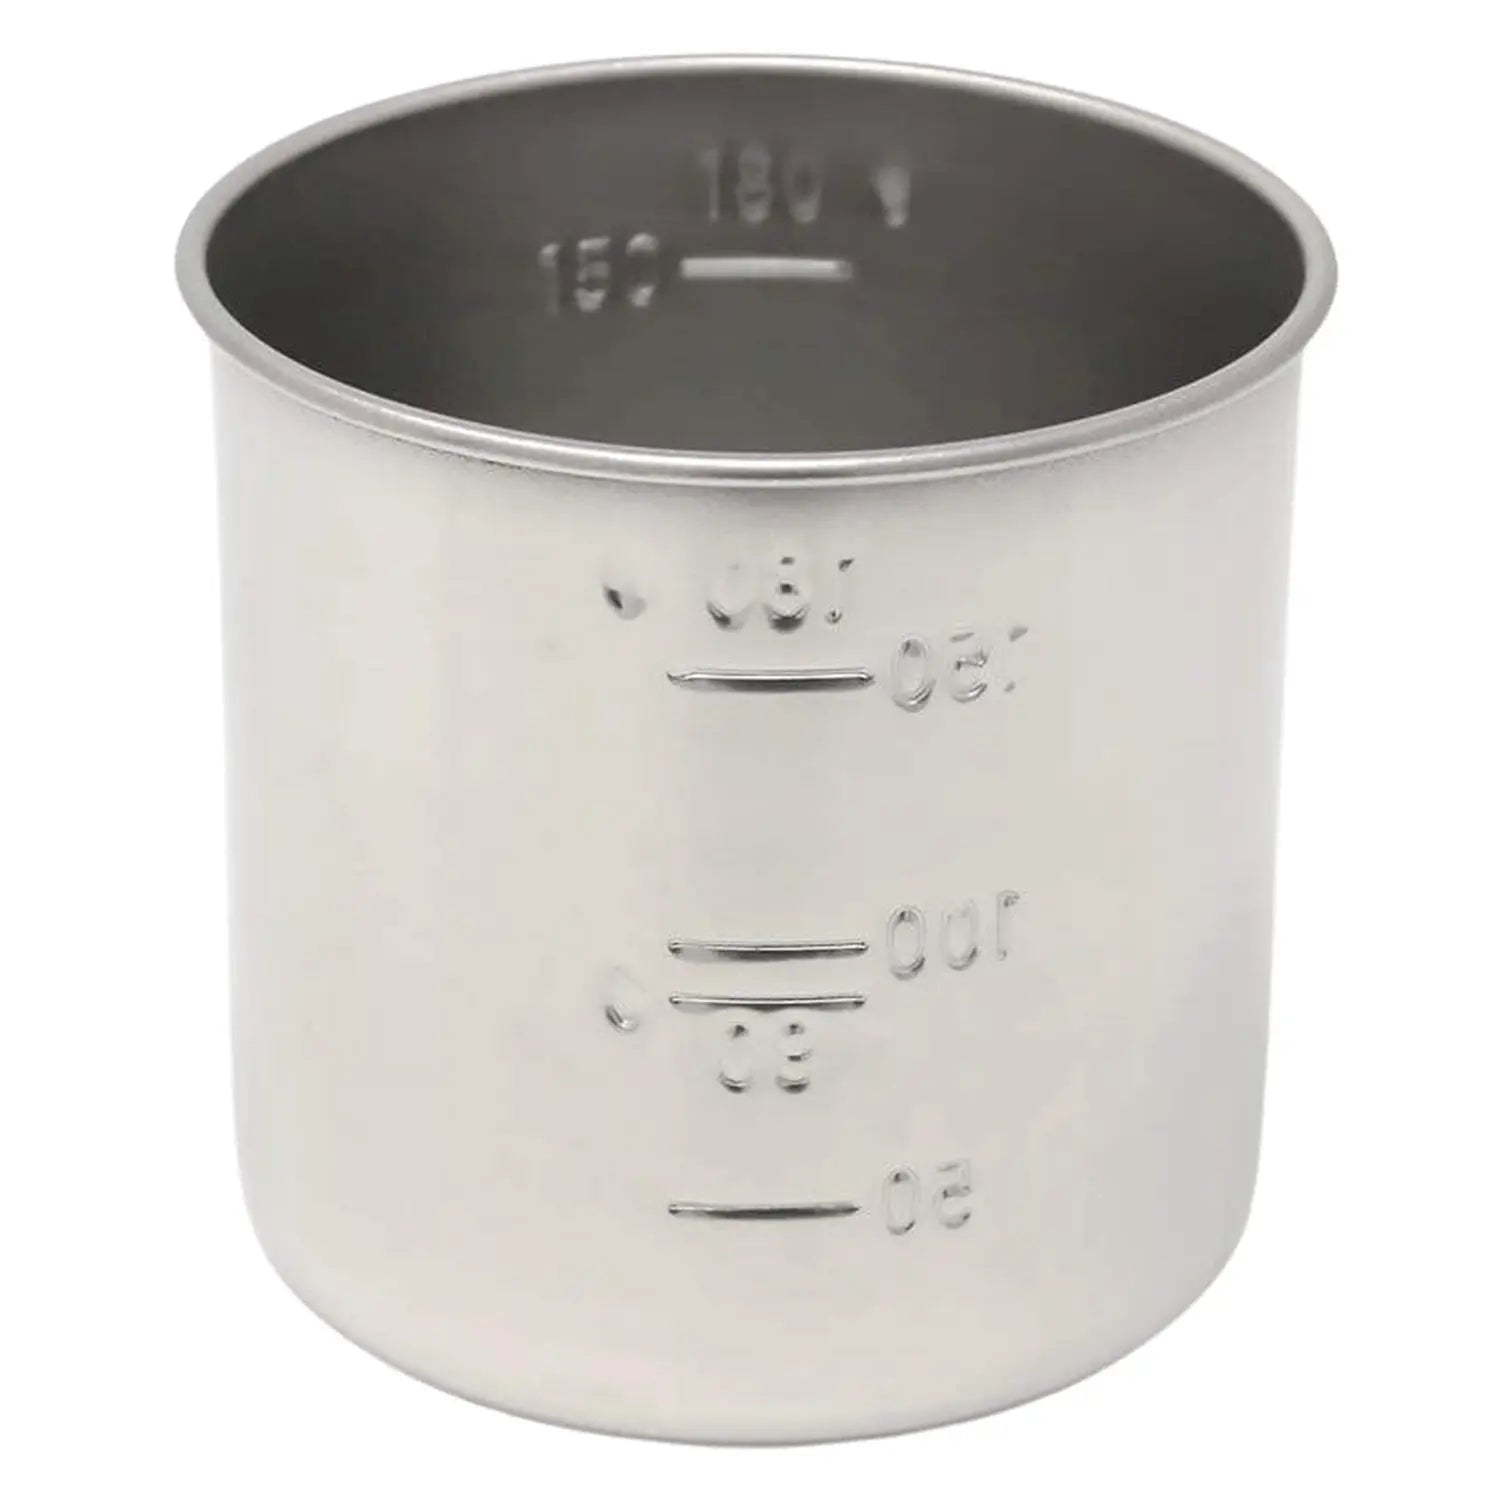 Daiso Japanese Rice Measuring Cup(180cc = 1 Gou Cup) Stainless Steel:  04589949074564: All: DealOz.com